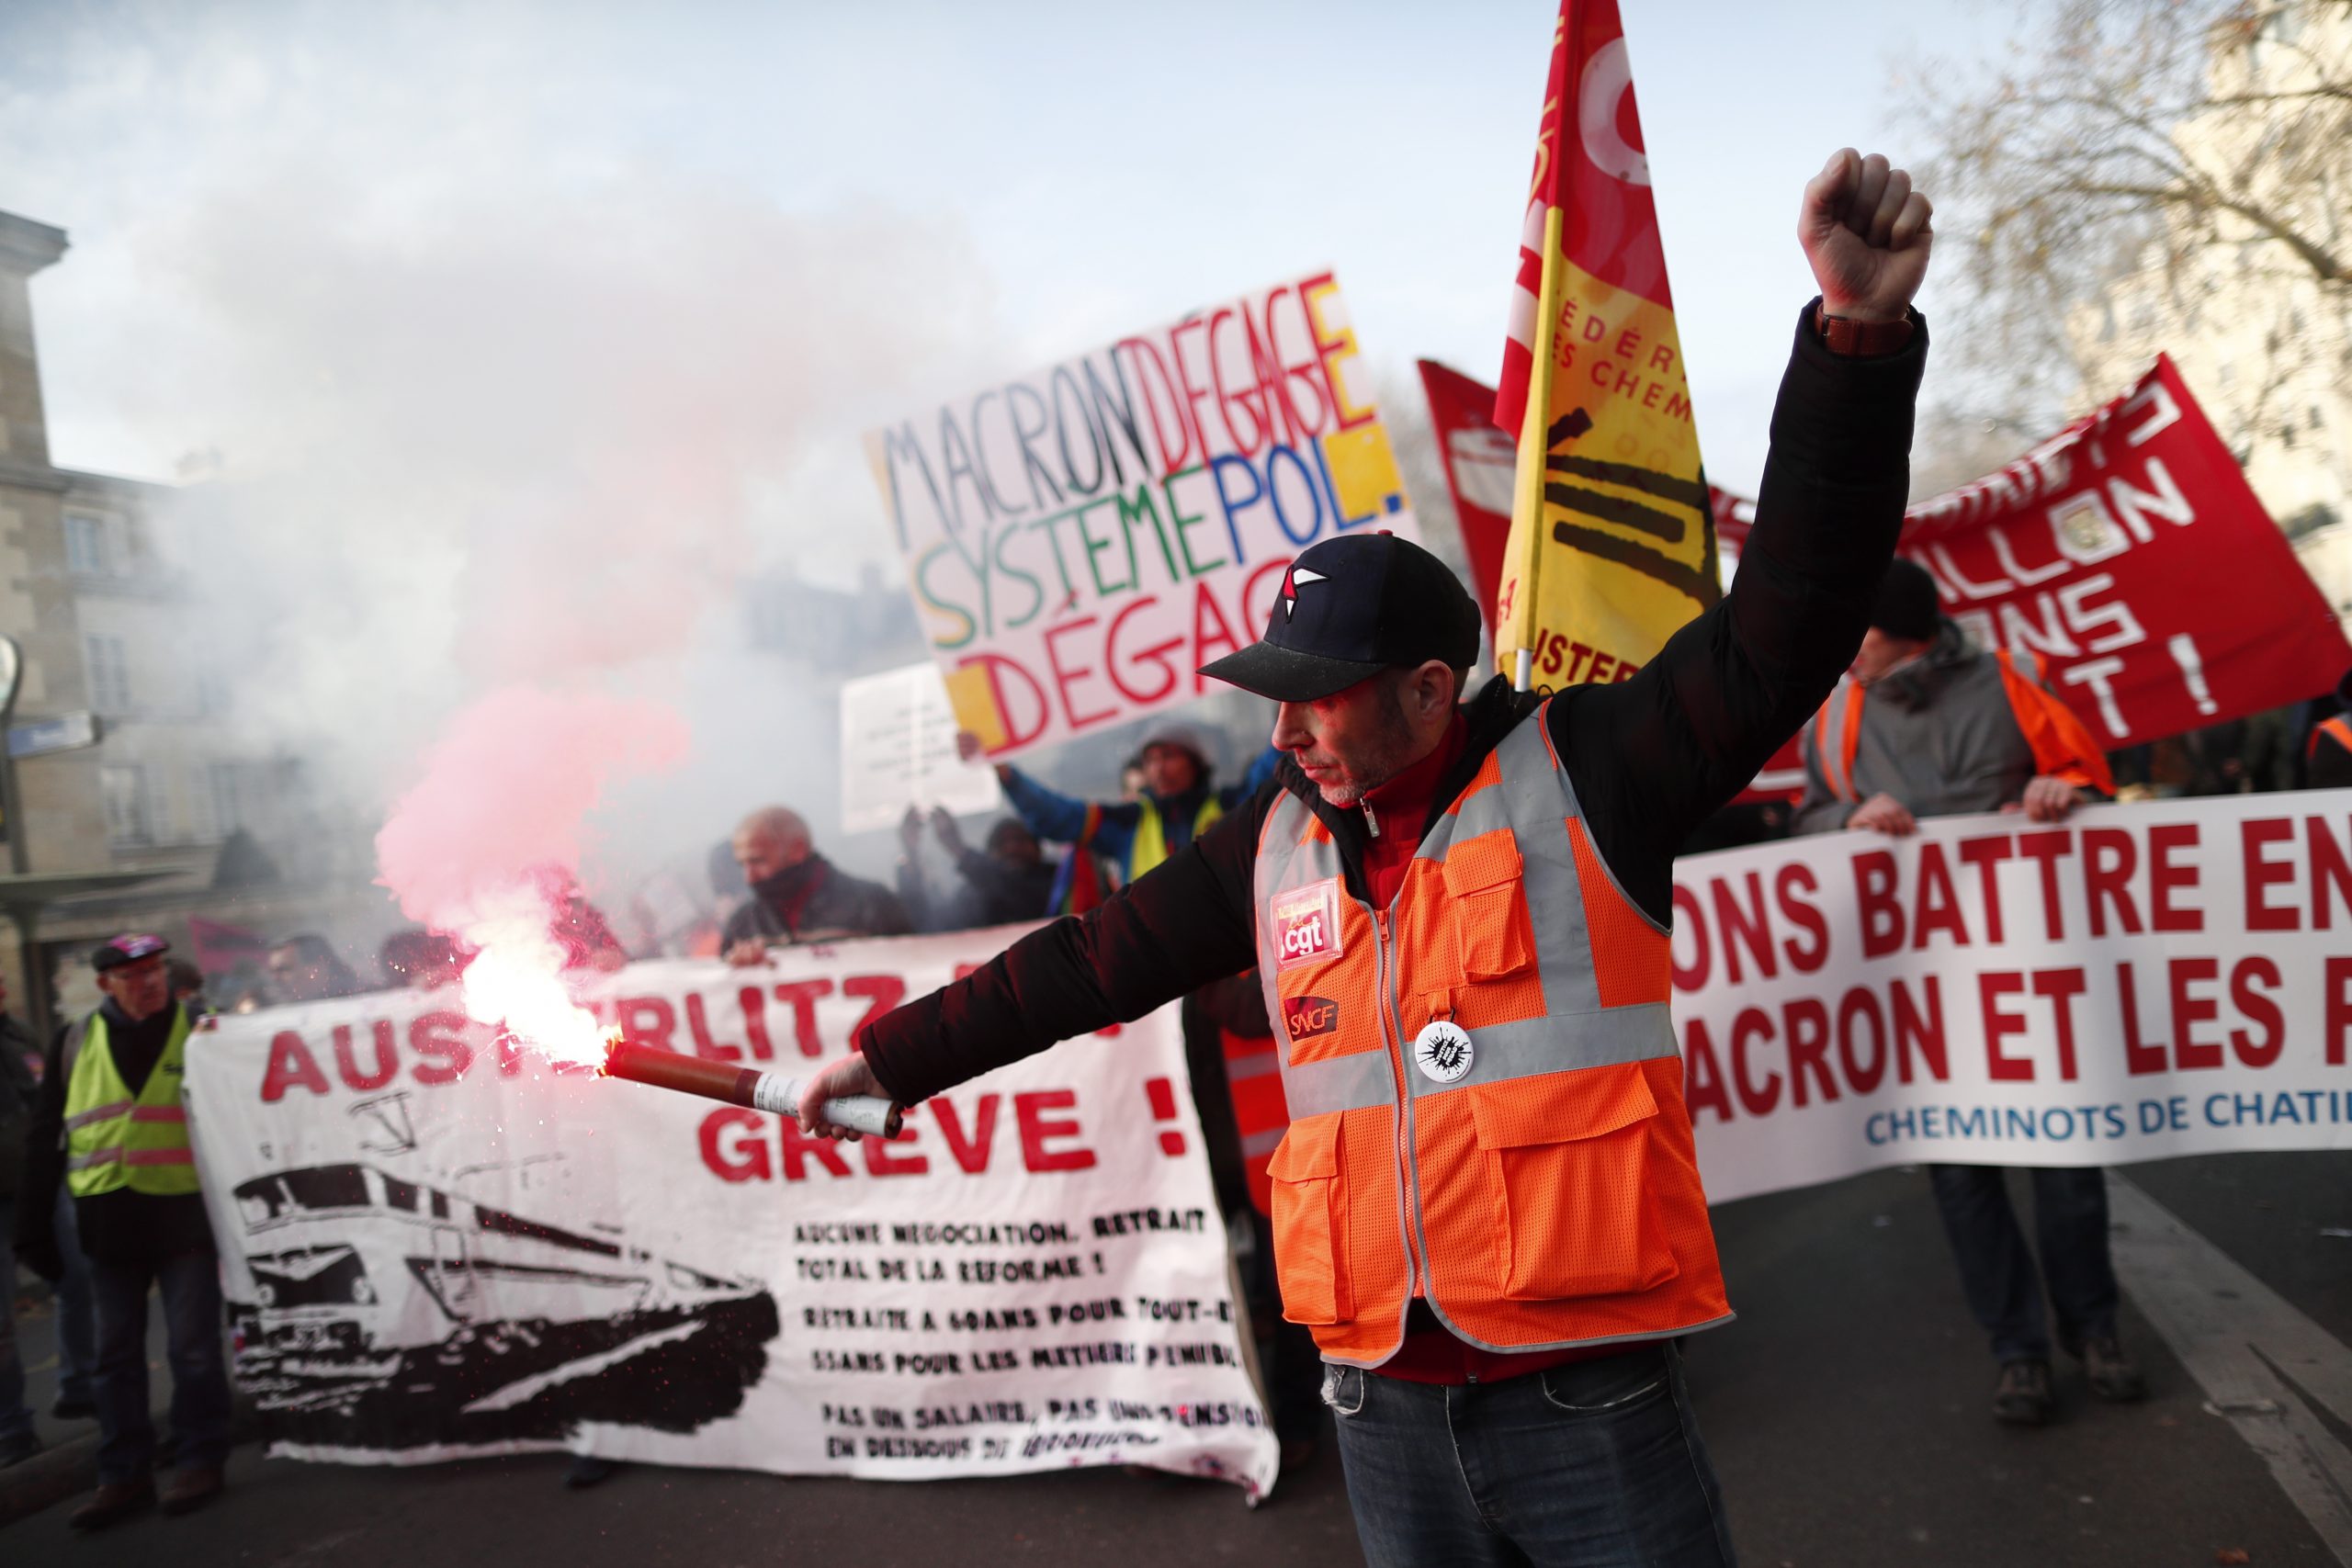 epa08059975 A protestor lights a flare as he participates in a demonstration against pension reforms in Paris, France, 10 December 2019. French unions representing railway and transport workers and many others in the public sector called for a general strike and demonstrations to protest against the French government's reform of the pension system which is planned to be announced on 11 December.  EPA/IAN LANGSDON